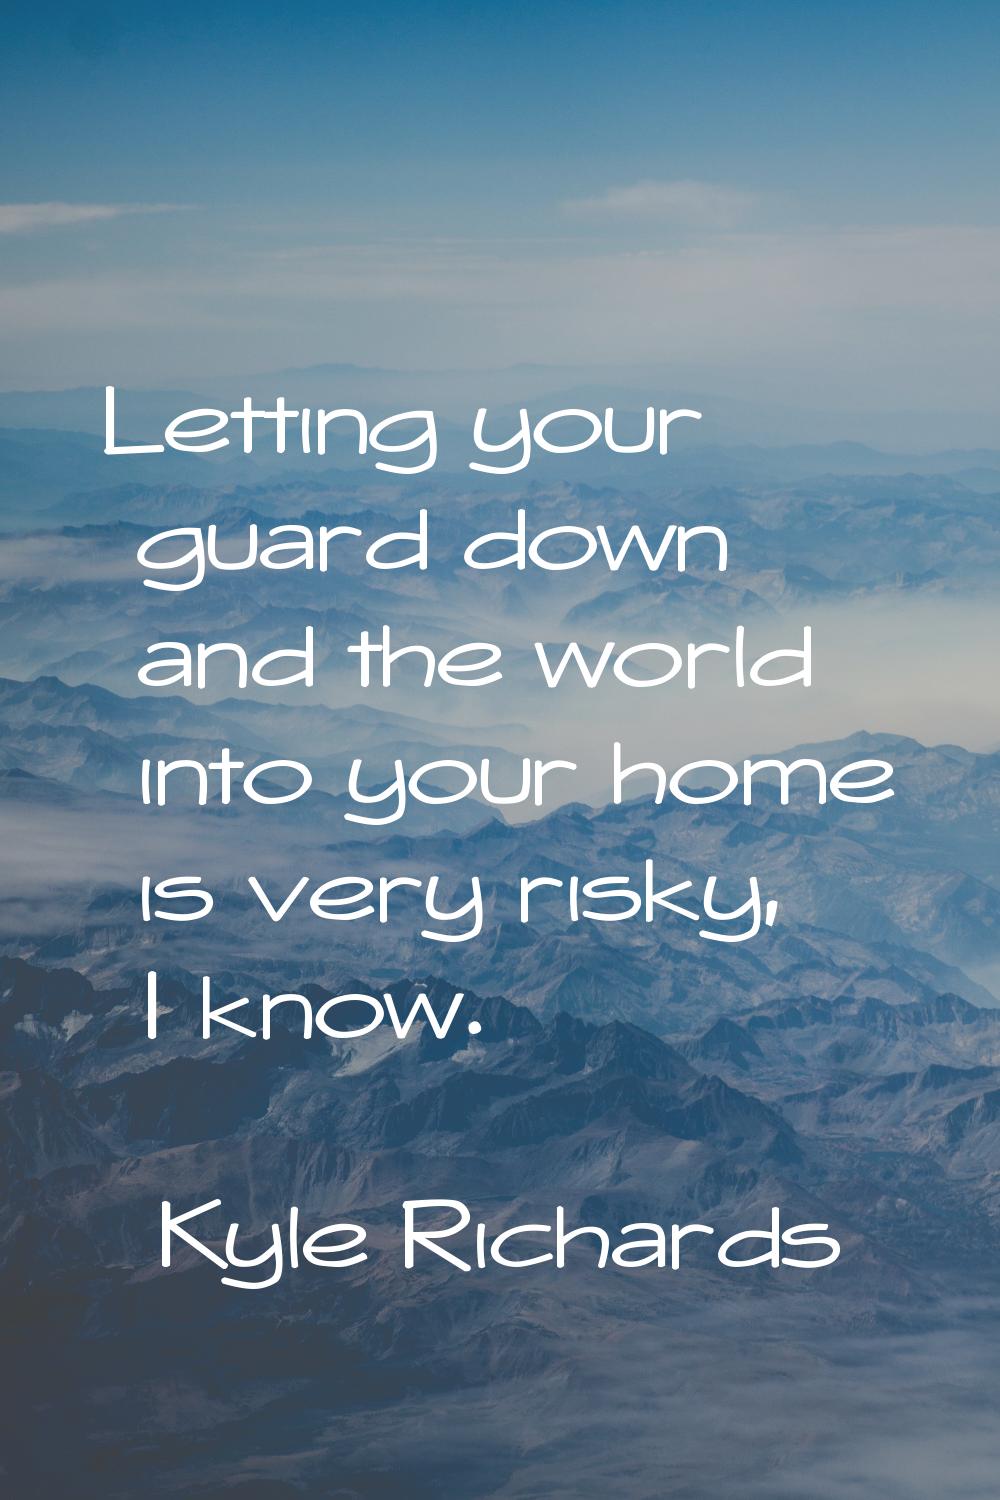 Letting your guard down and the world into your home is very risky, I know.